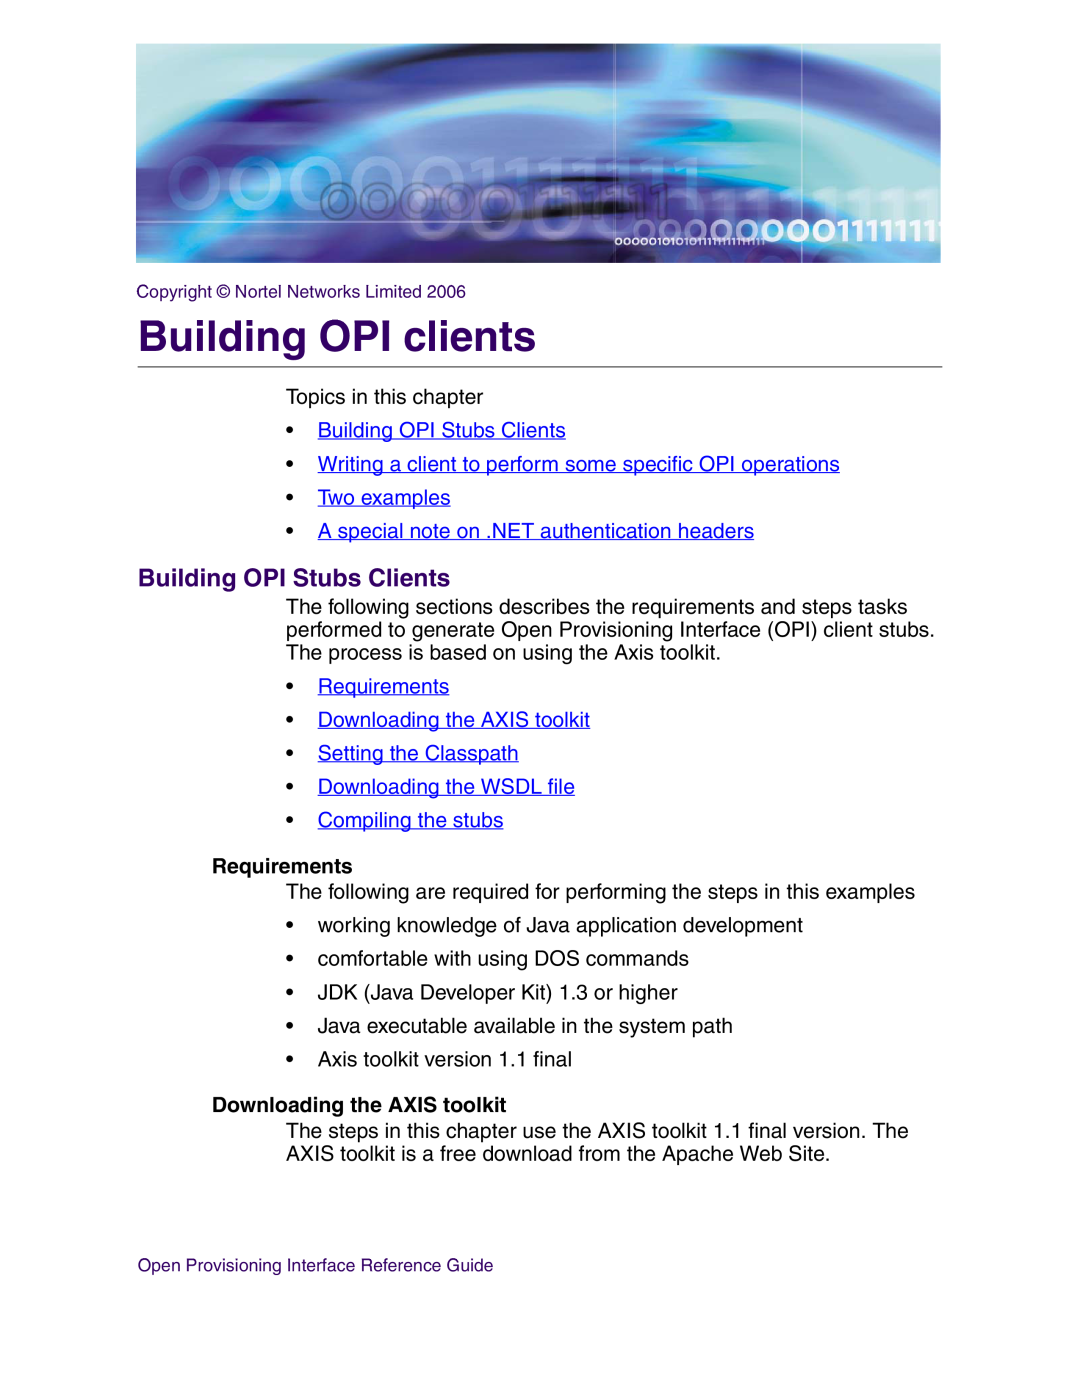 Nortel Networks NN42020-123 Building OPI clients, Building OPI Stubs Clients, Requirements, Downloading the AXIS toolkit 